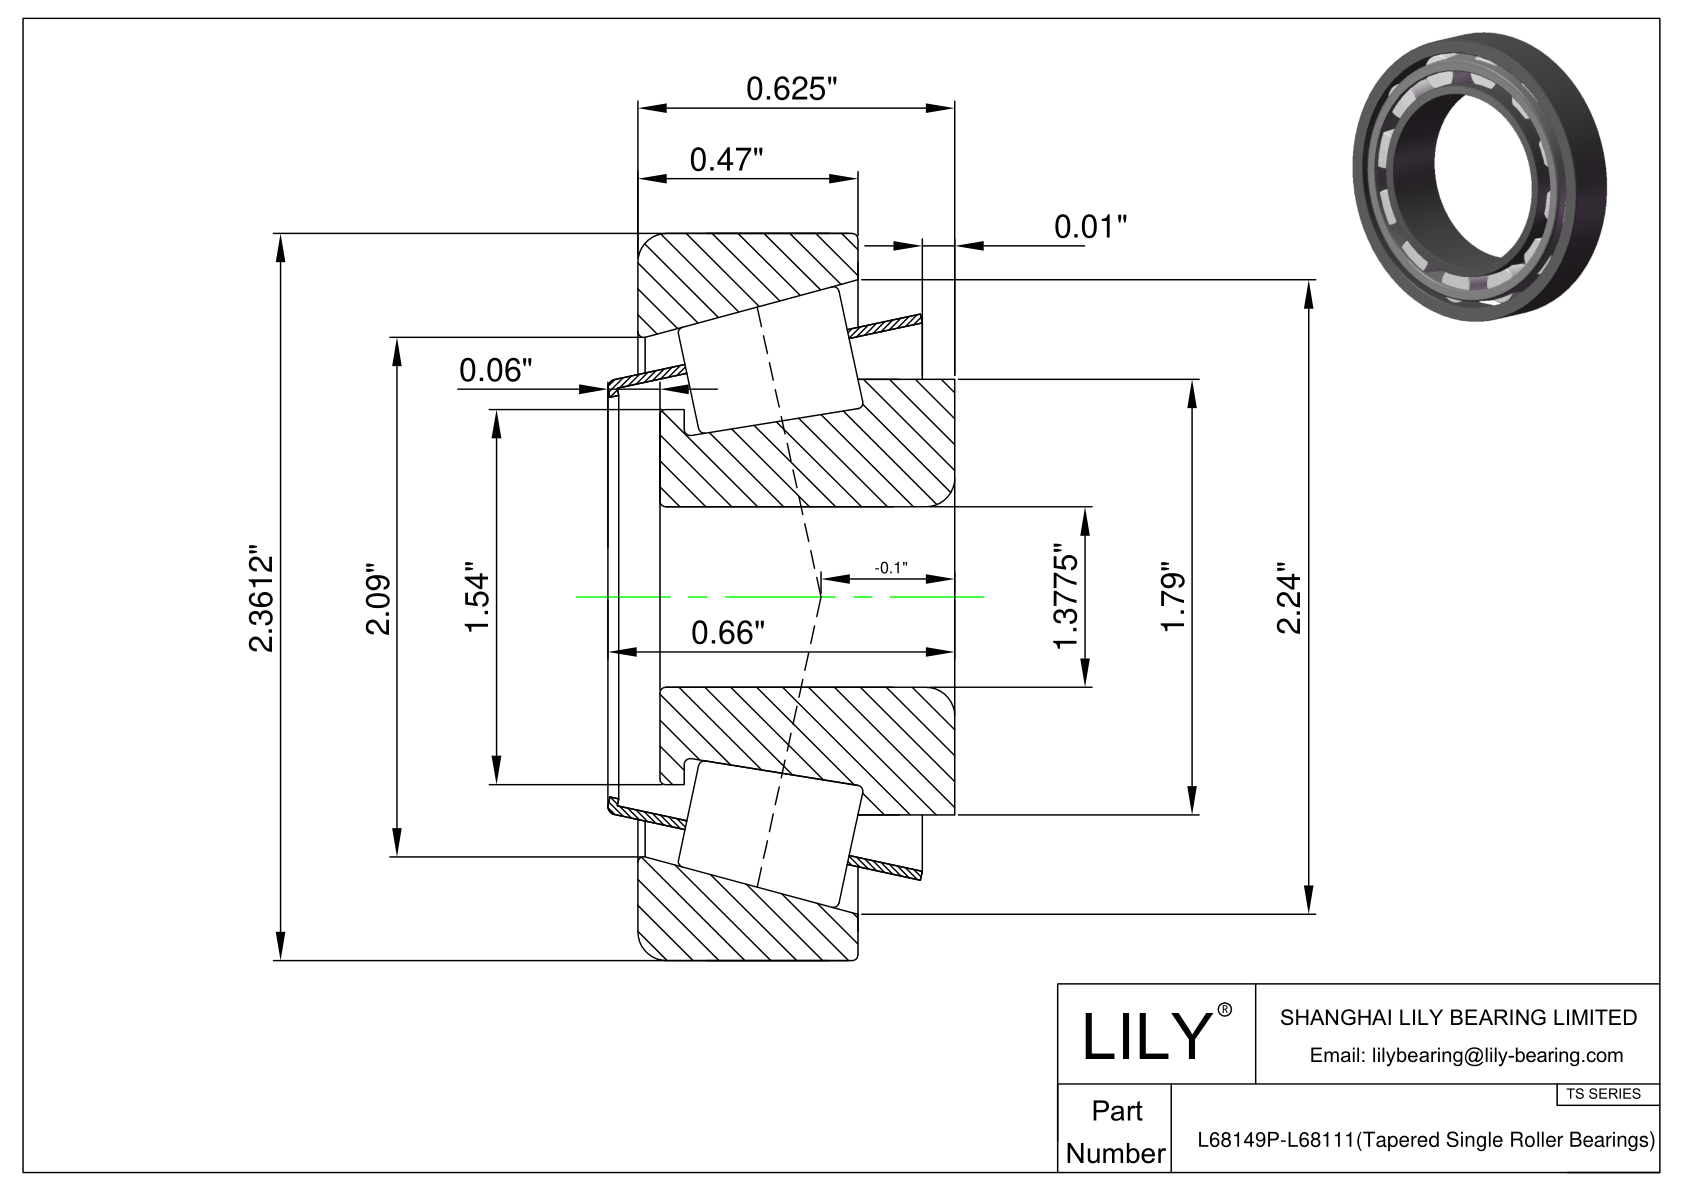 L68149P-L68111 TS (Tapered Single Roller Bearings) (Imperial) cad drawing